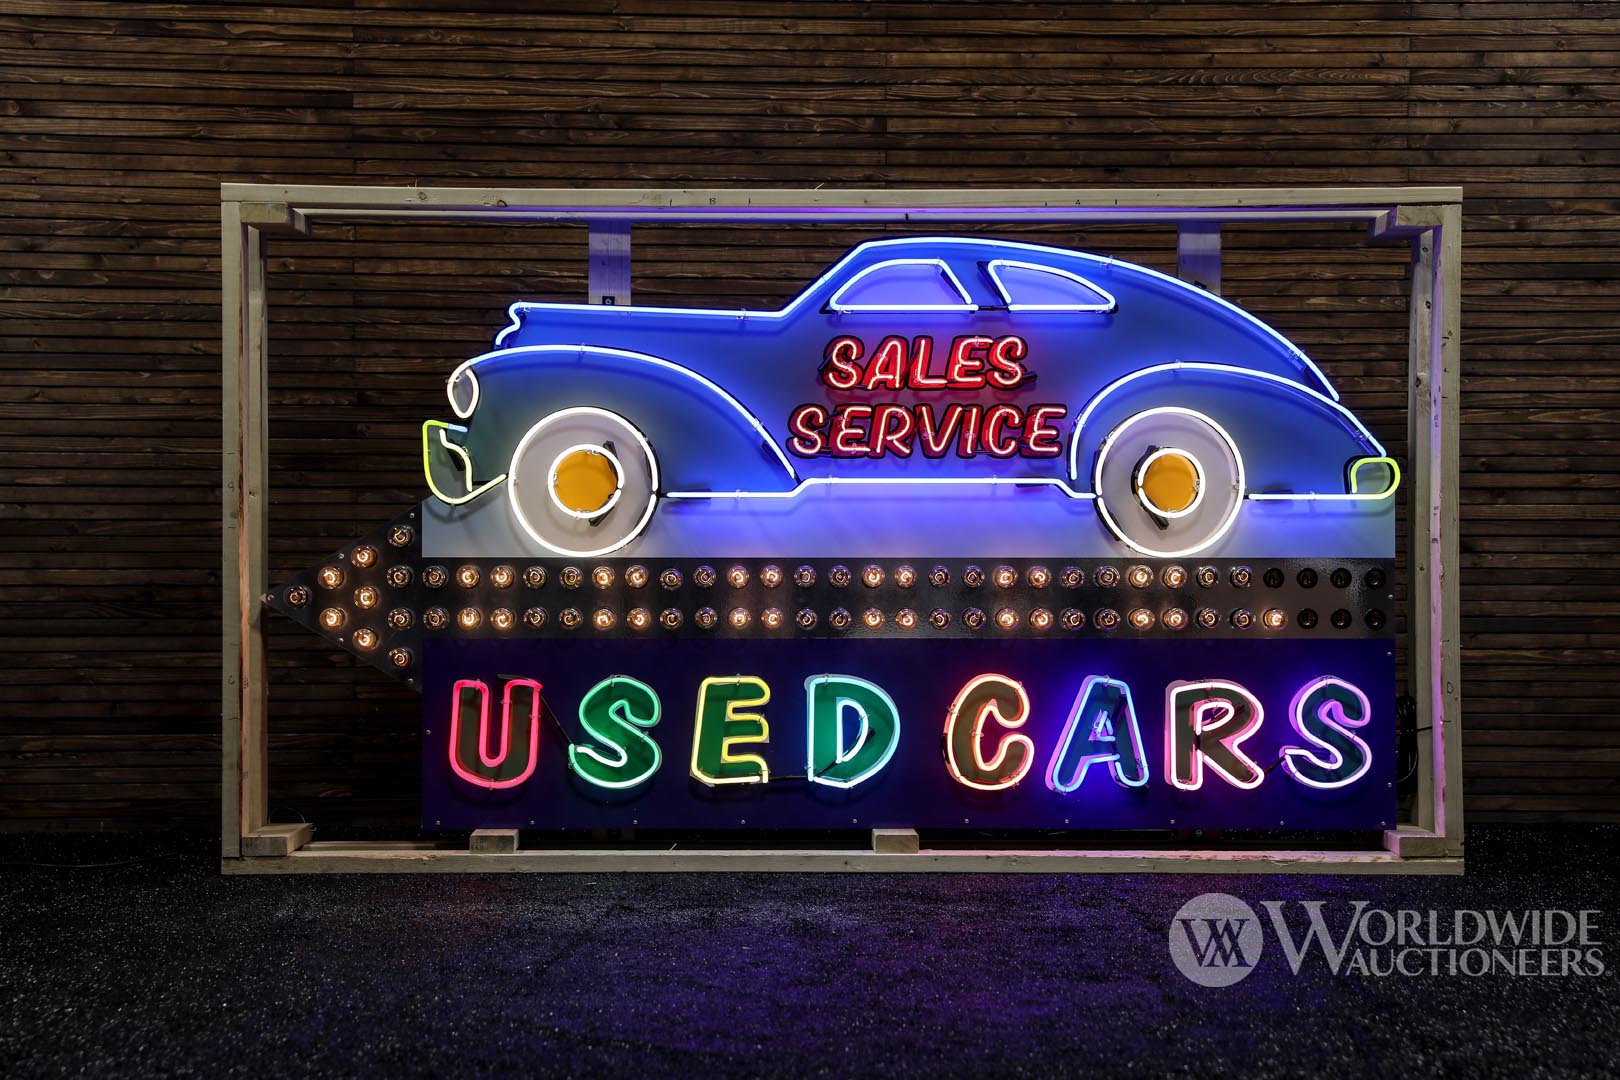 Used Cars/Sales Service Lighted-Neon Sign